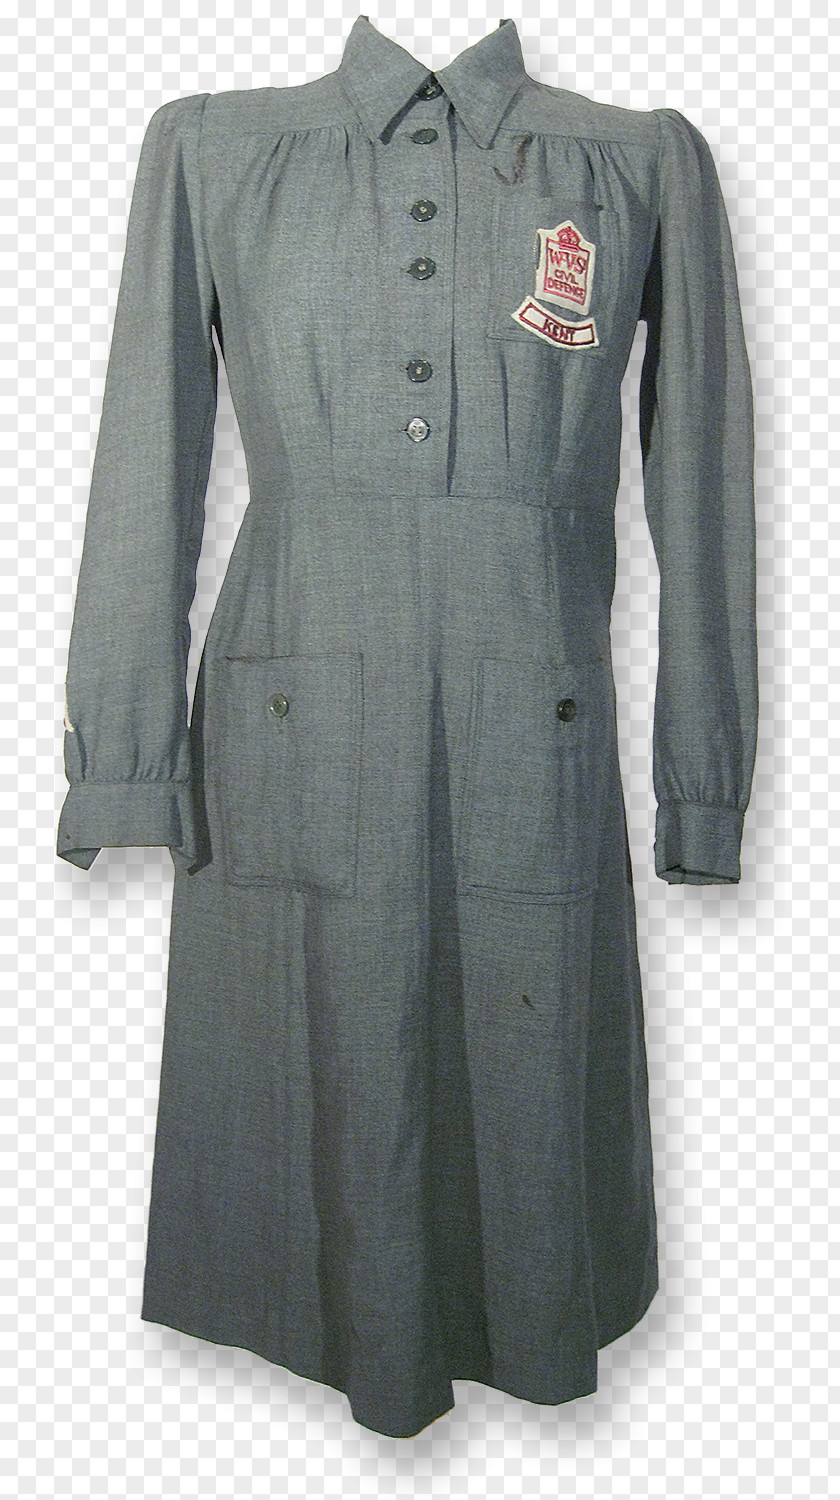 Dress Second World War Overcoat Prison Uniform Uniforms Of The United States Navy PNG